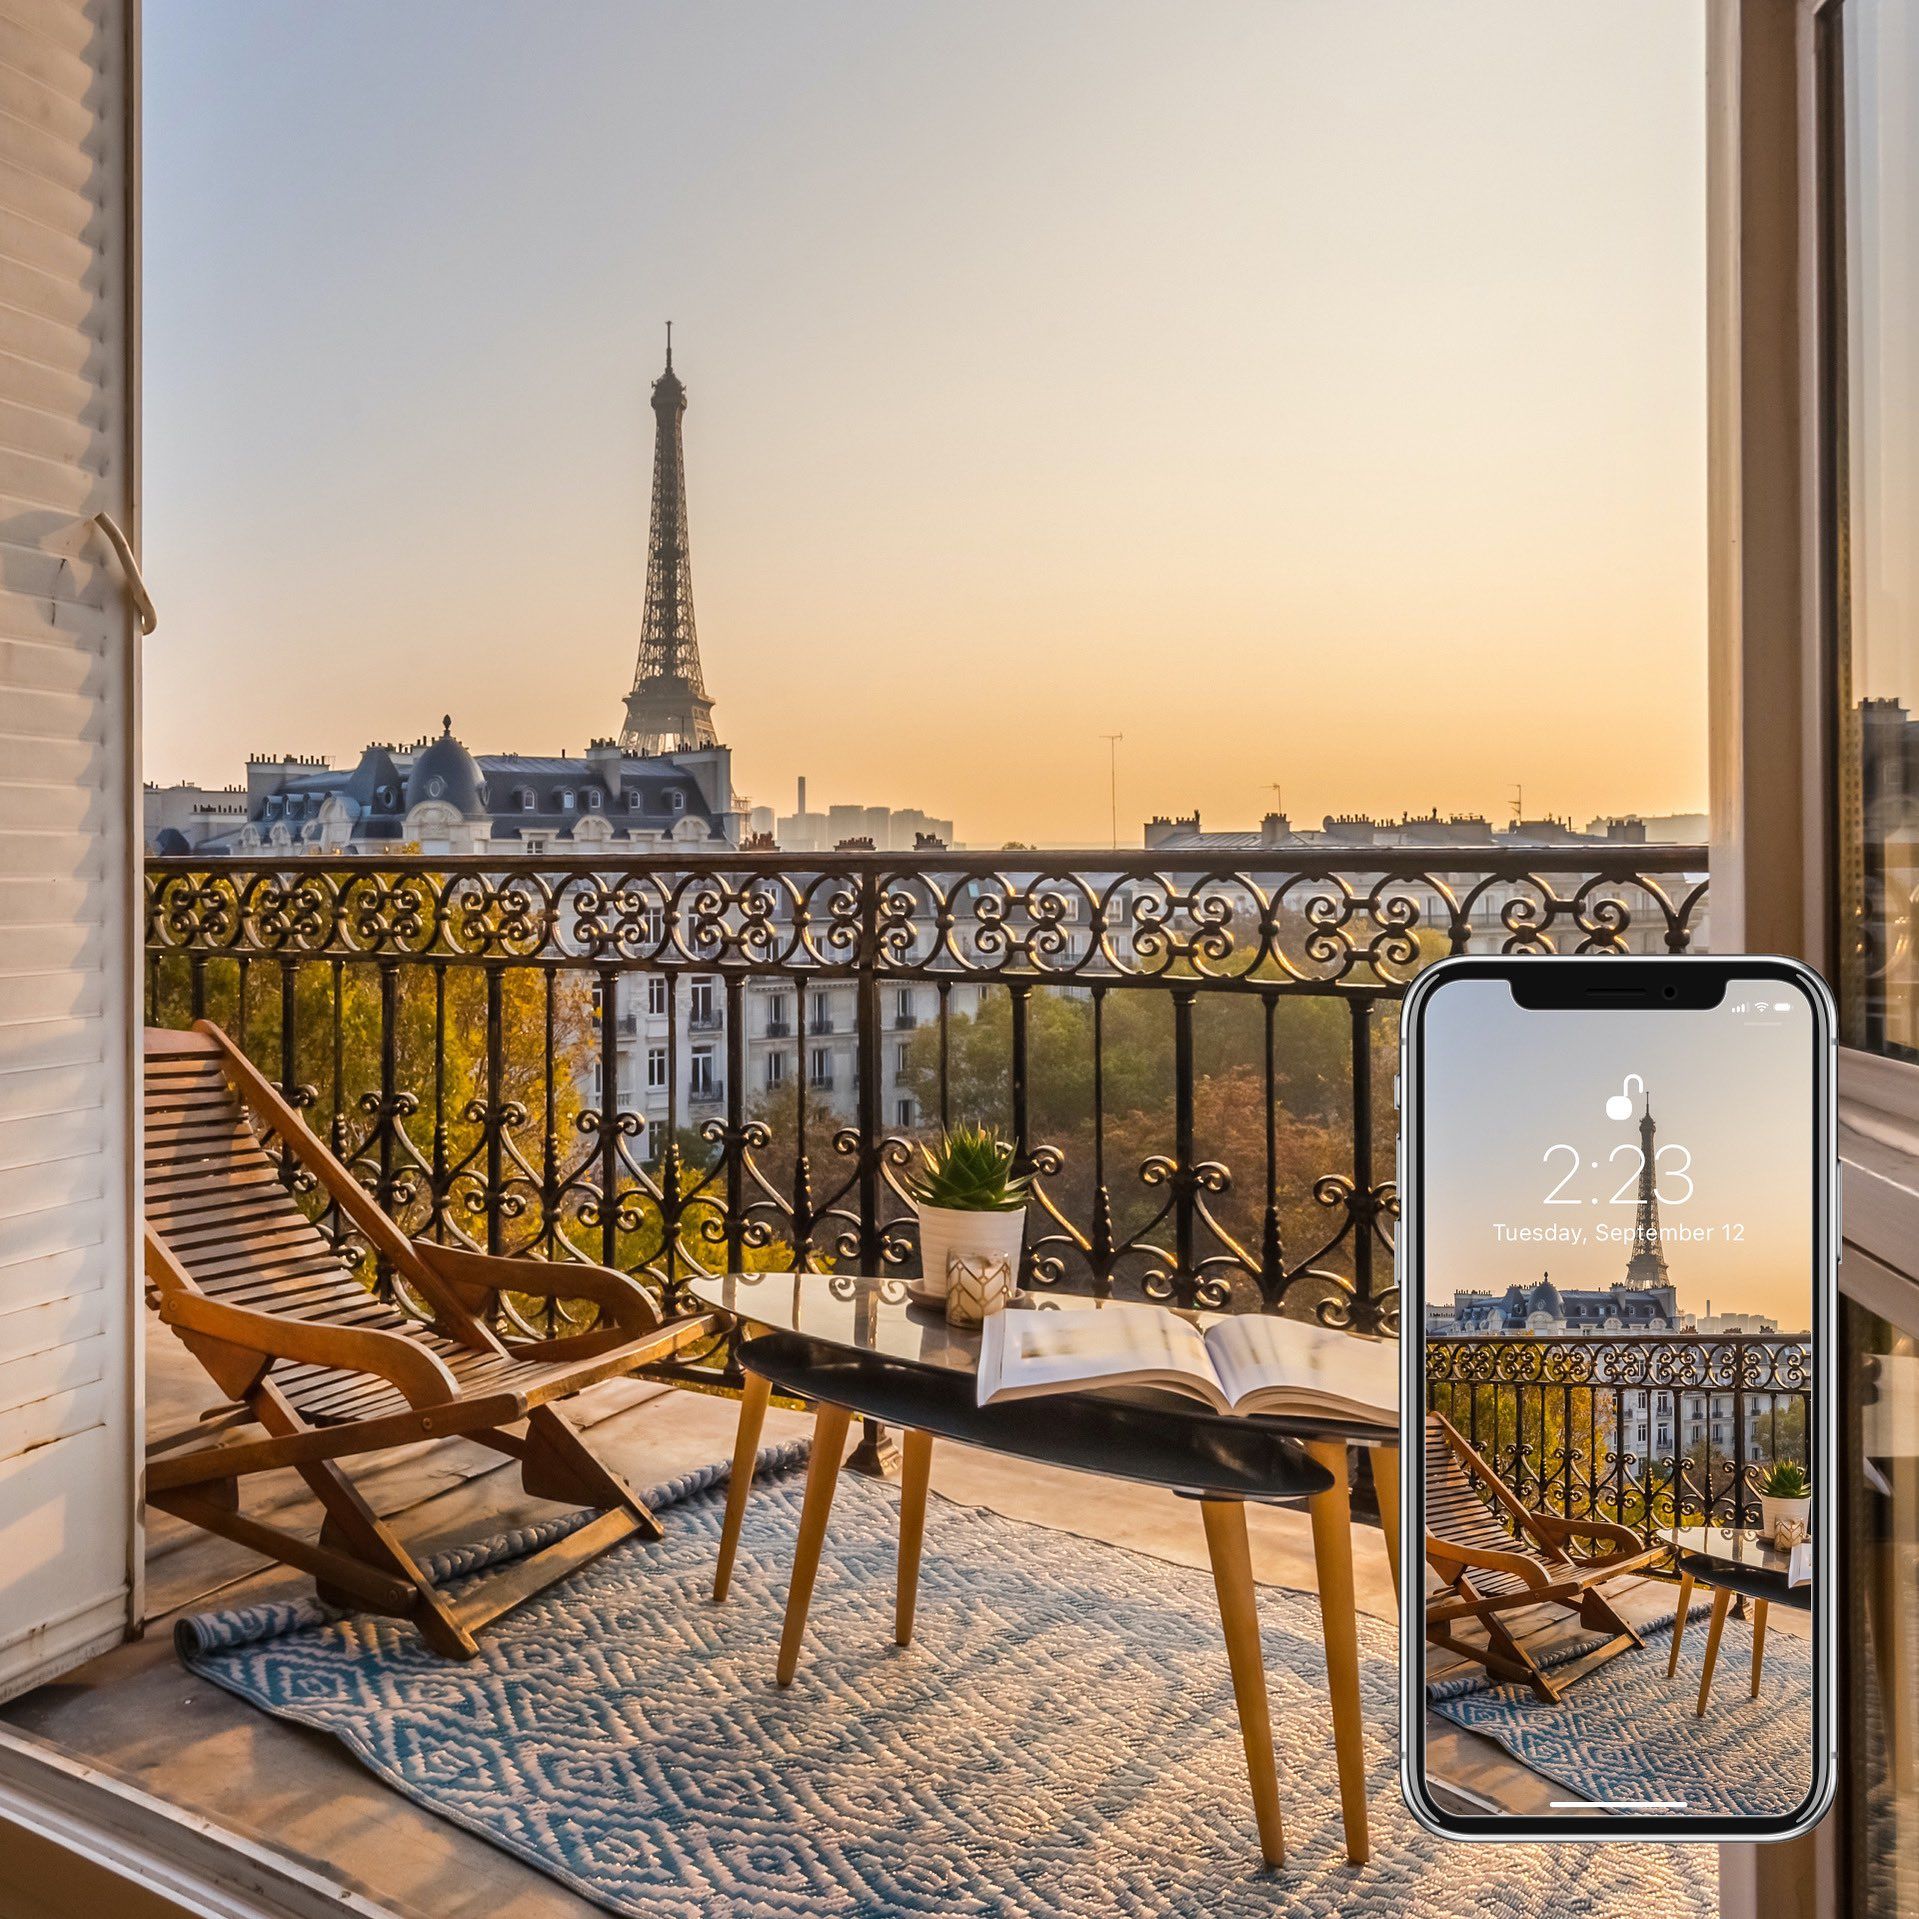 We want to share this Parisian sunset with you☀️ #wallpaper #screensaver #background #sfondi #papeisdeparede #papeisdeparedetumblr #wallpaperhd #wallpaperiphone #wallpaperandroid #holographic #abstract # aestheticwallpaper #paris